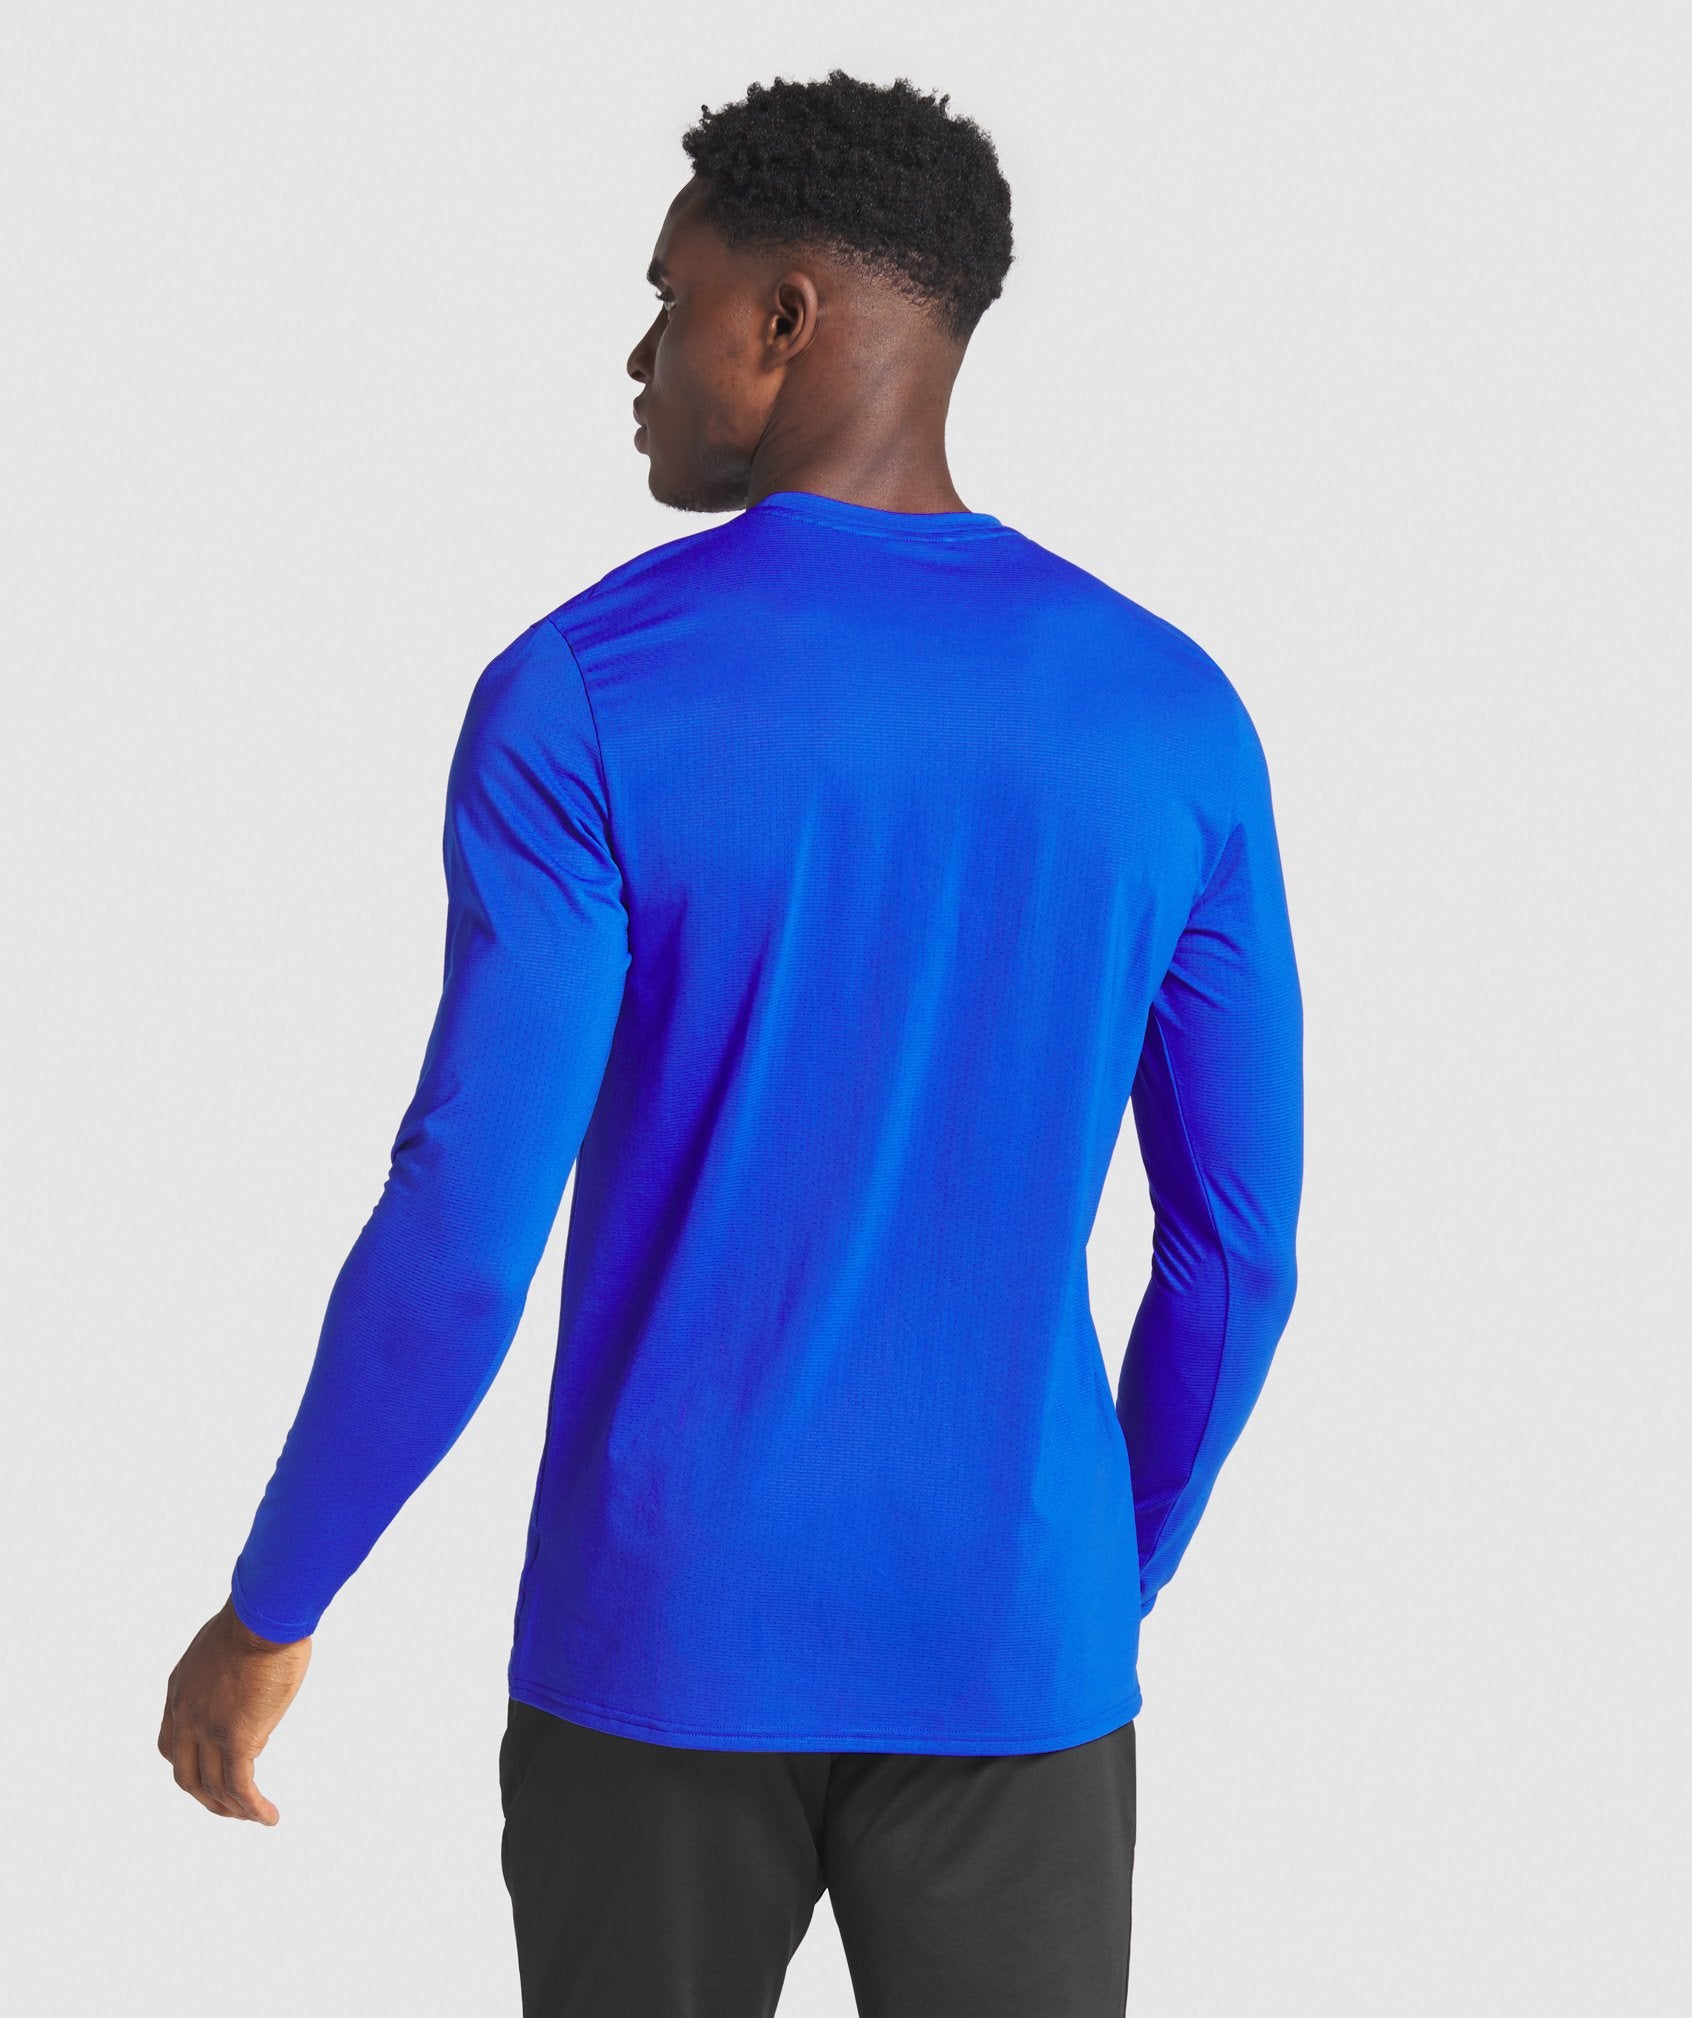 Arrival Long Sleeve Graphic T-Shirt in Blue